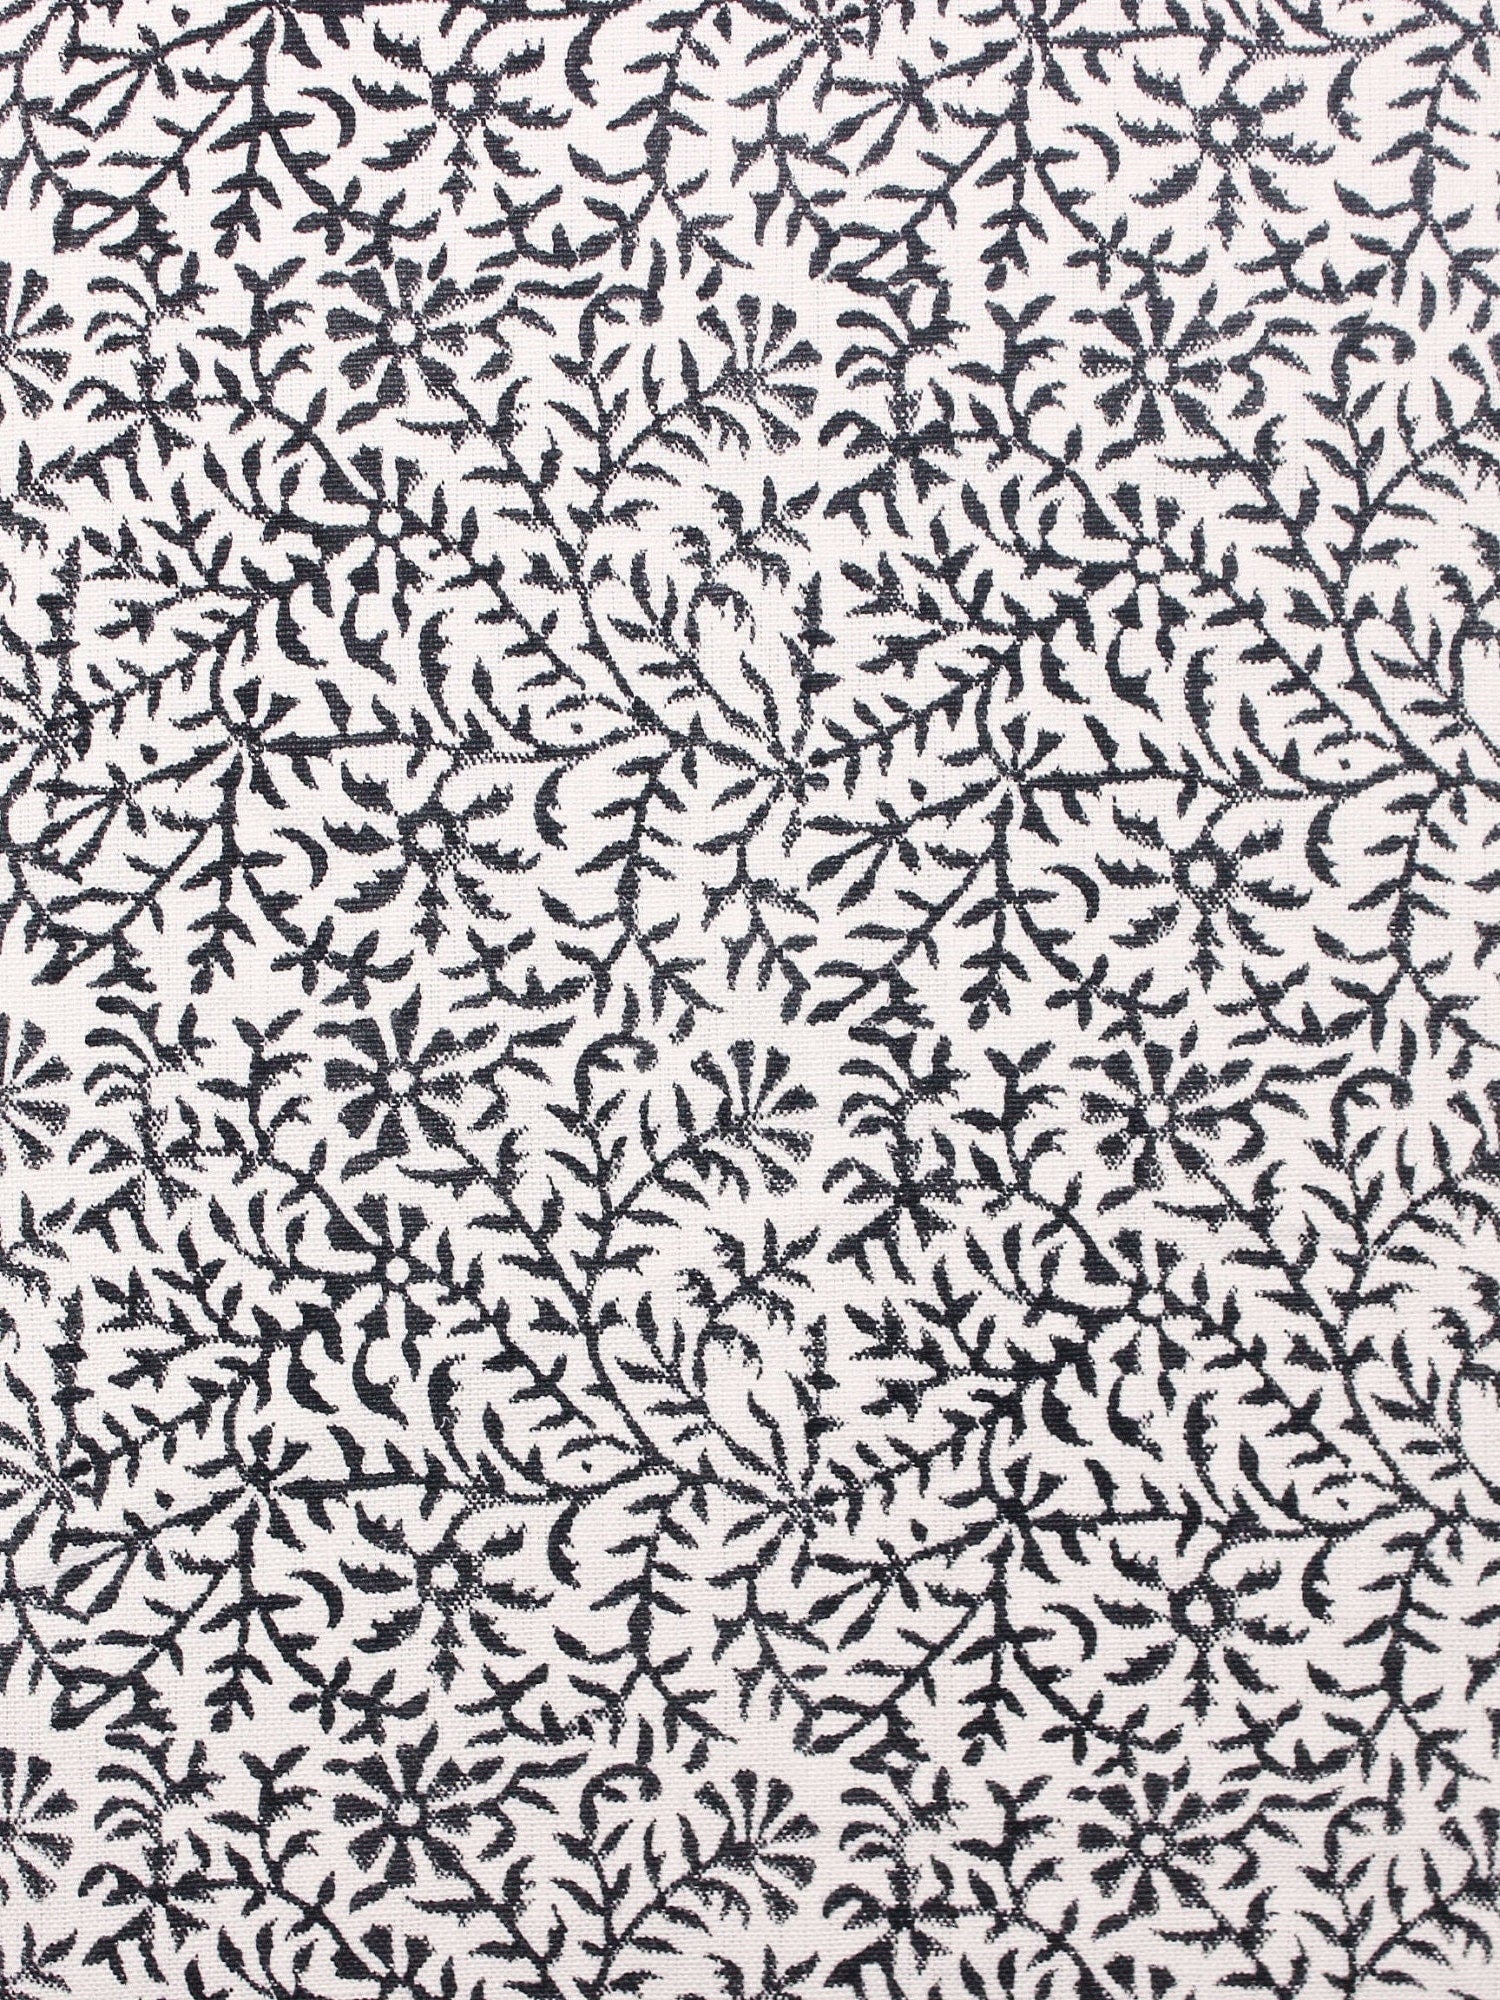 Junglee Ghass  Block Print Fabric Black & White, Indian Fabric Linen Fabric, Block Printed Pillow Covers, Leaf Floral Upholstery Fabric